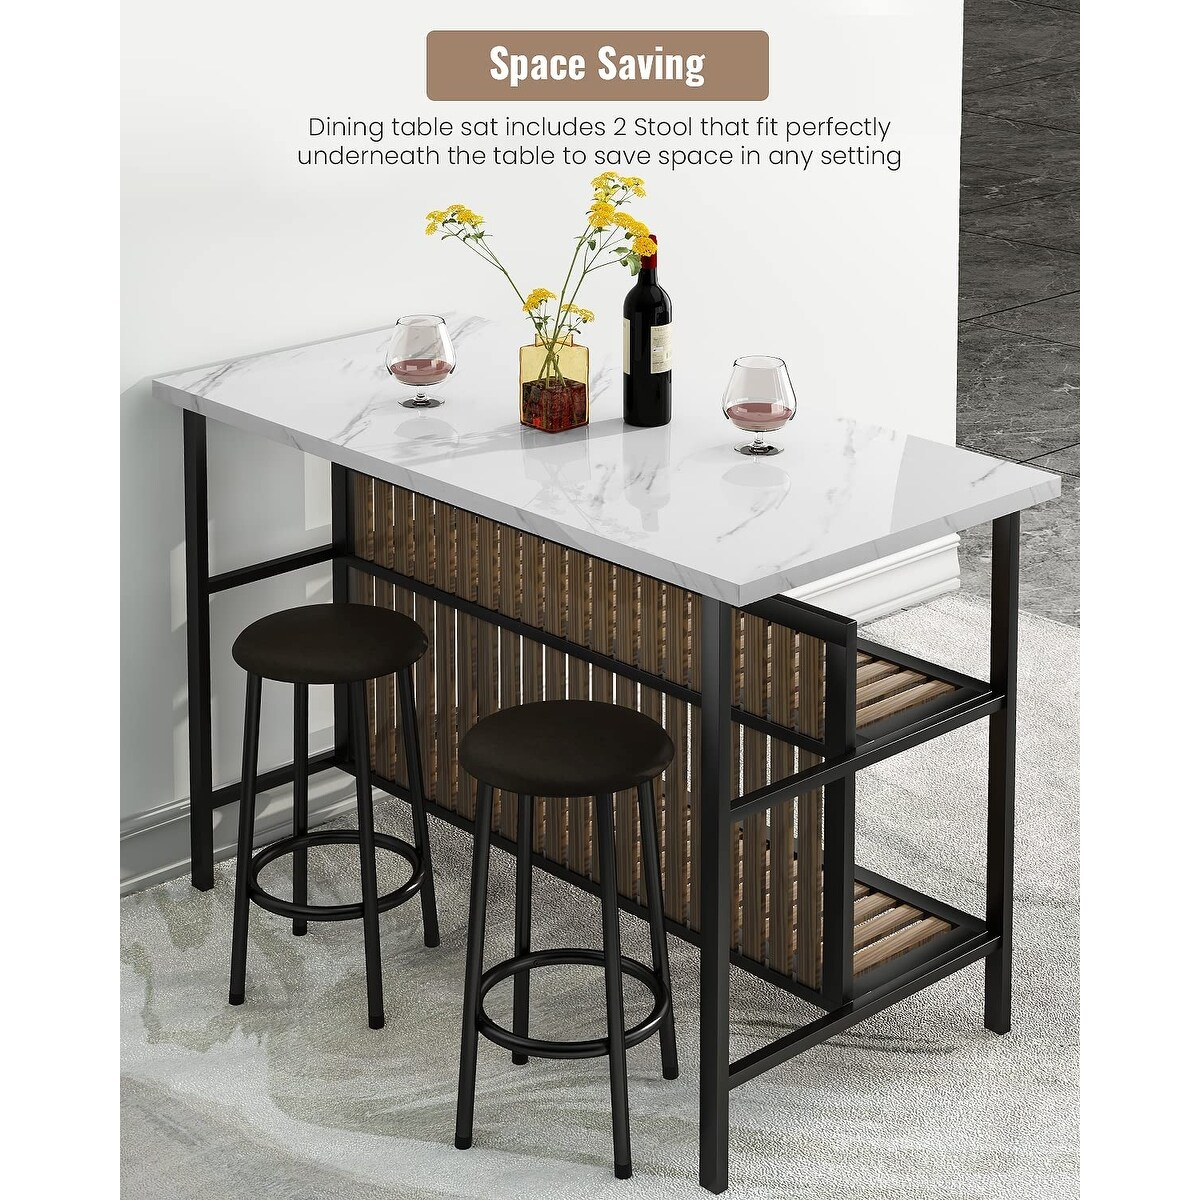 https://ak1.ostkcdn.com/images/products/is/images/direct/424721ffe291bdba2d233b2fe3e691807f022297/Mieres-Kitchen-Island-with-2-Stools-and-Open-Shelves.jpg